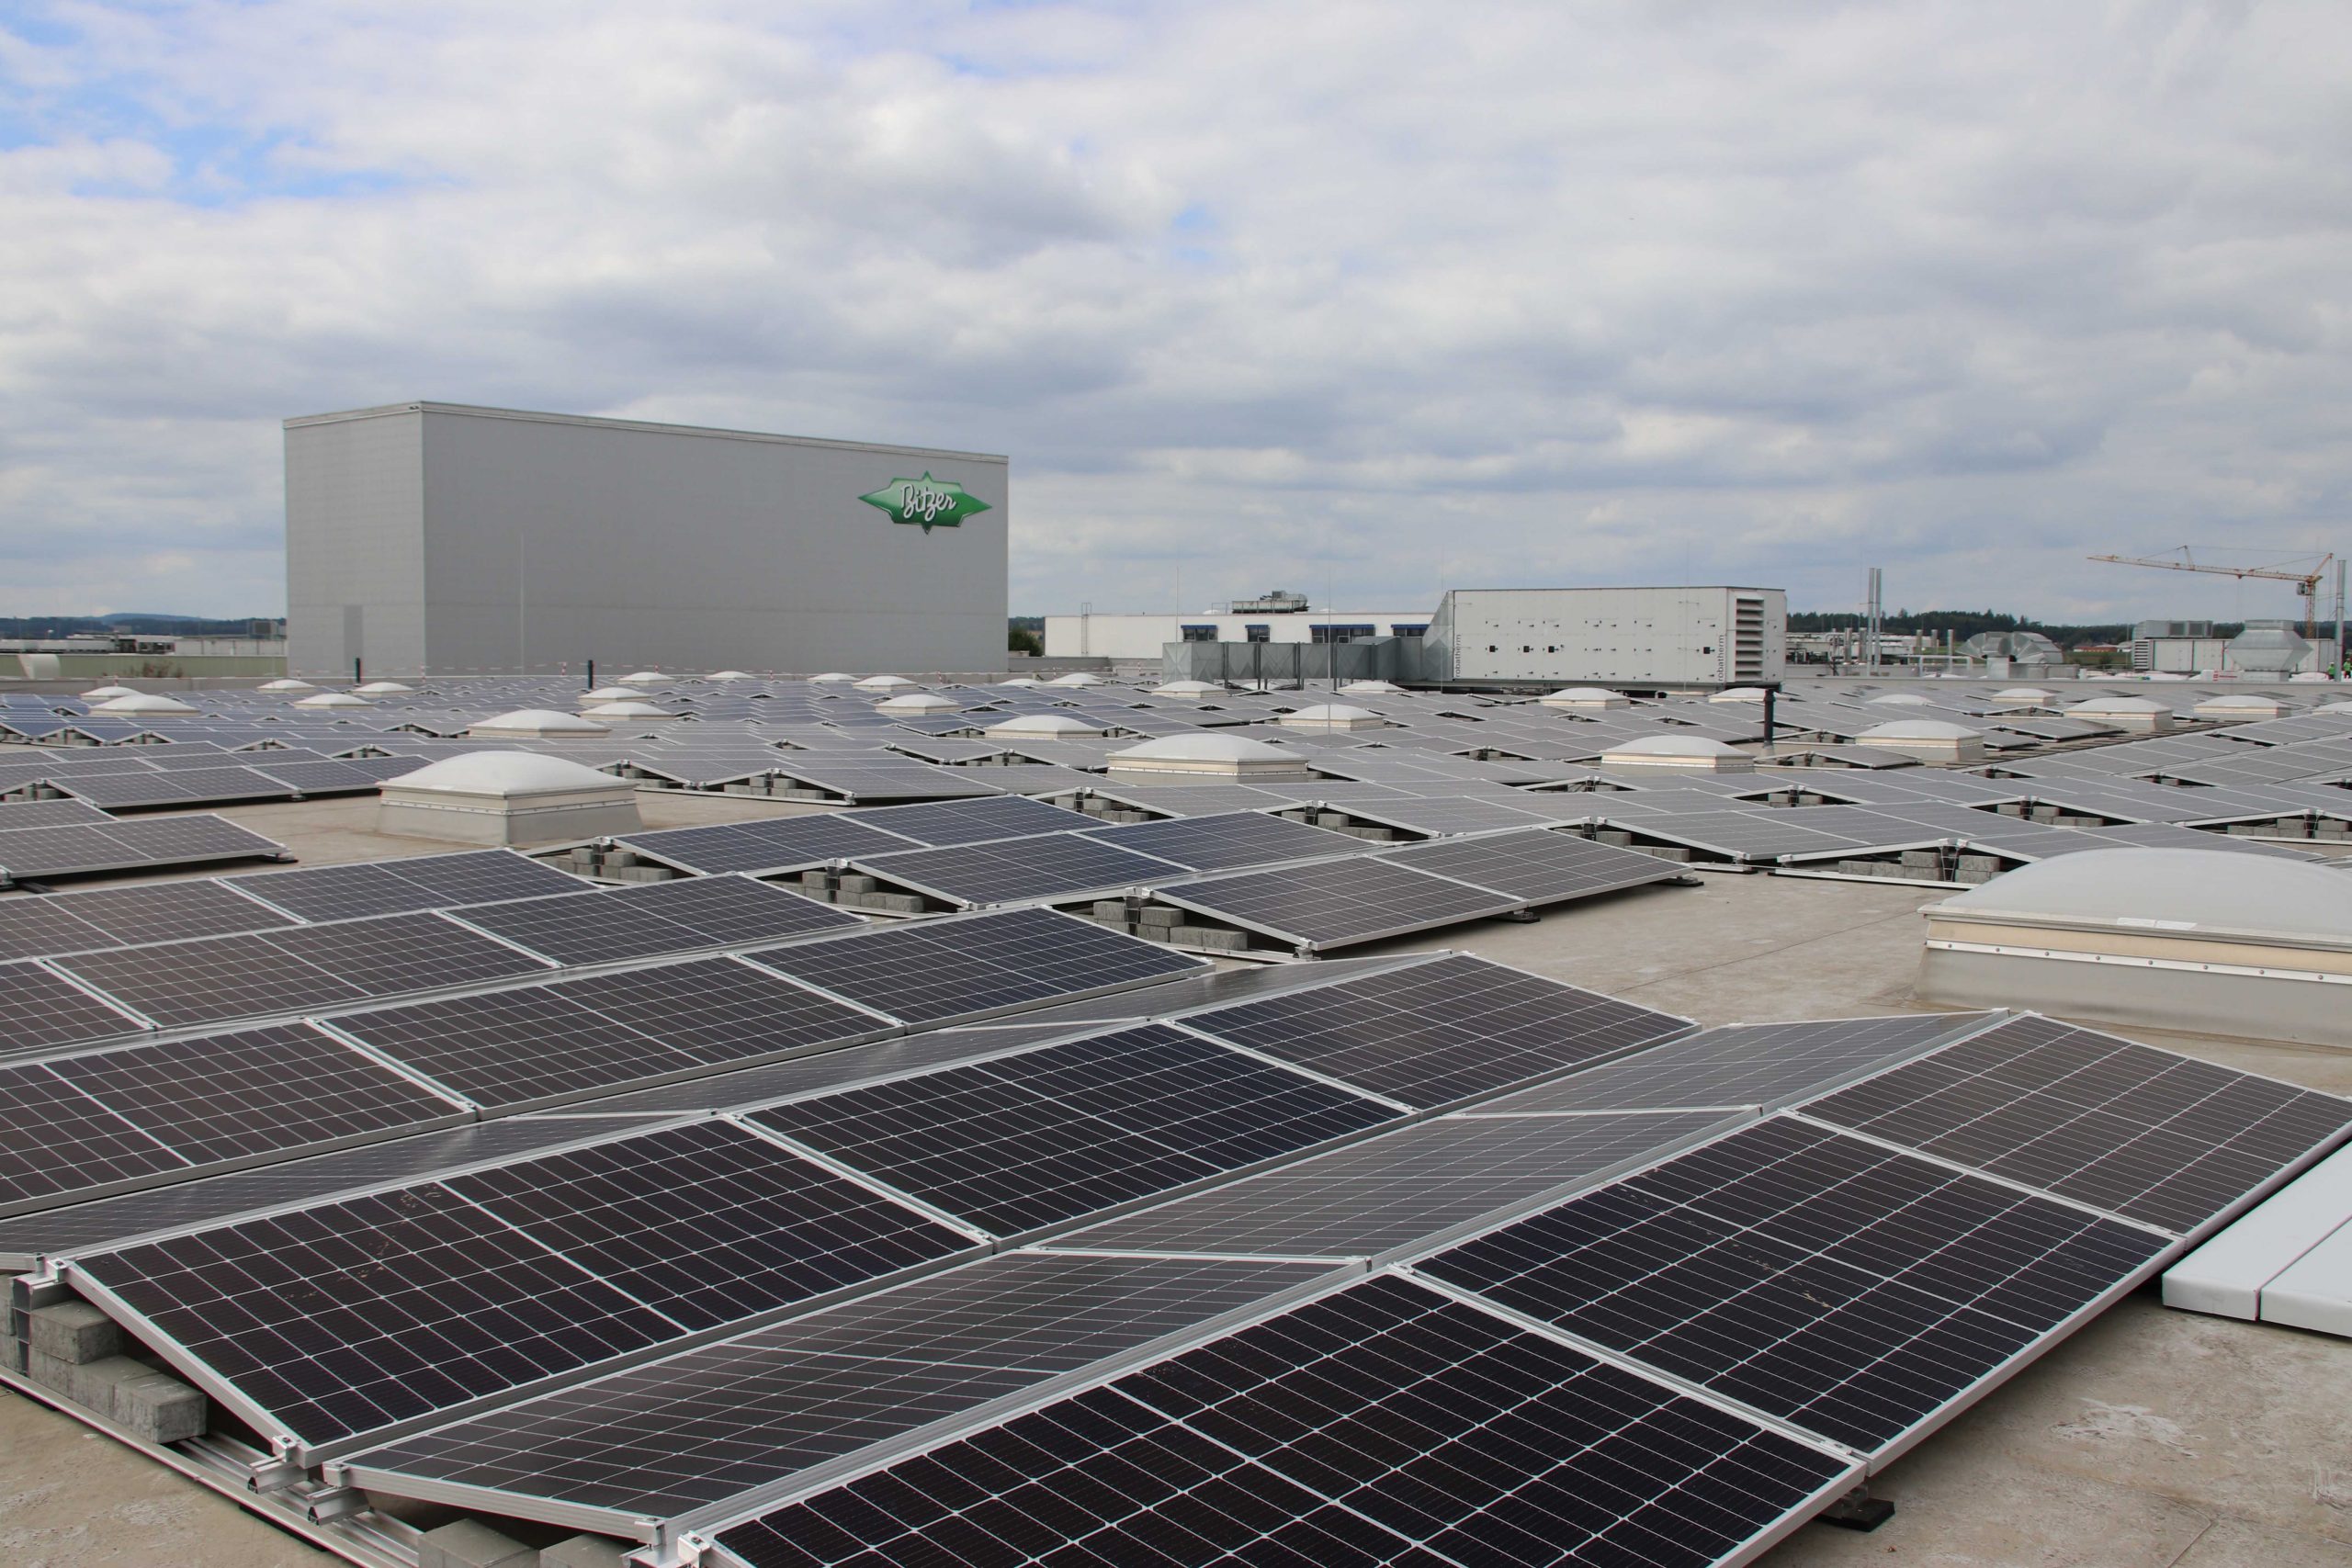 Sustainability is a topic of concern for today’s job applicants. At the BITZER production site in Rottenburg-Ergenzingen, solar panels generate over 60 per cent of the electricity required for operation